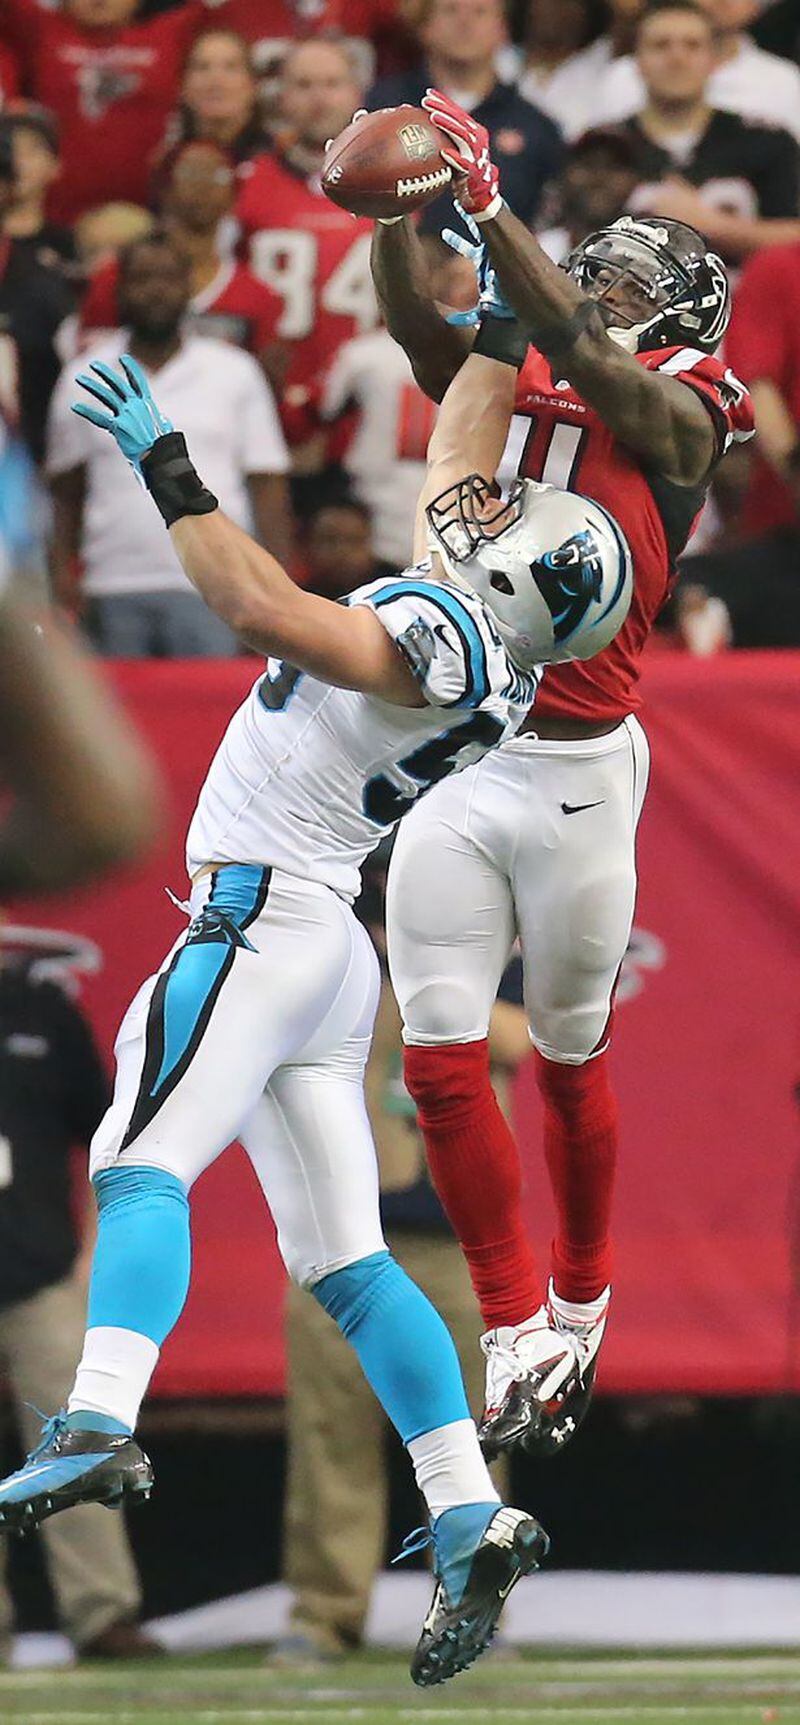 Julio Jones leaps over Carolina Panthers' LB Luke Kuechly for a spectacular catch that resulted in a 70-yard touchdown. (Curtis Compton/ccompton@jc.com)